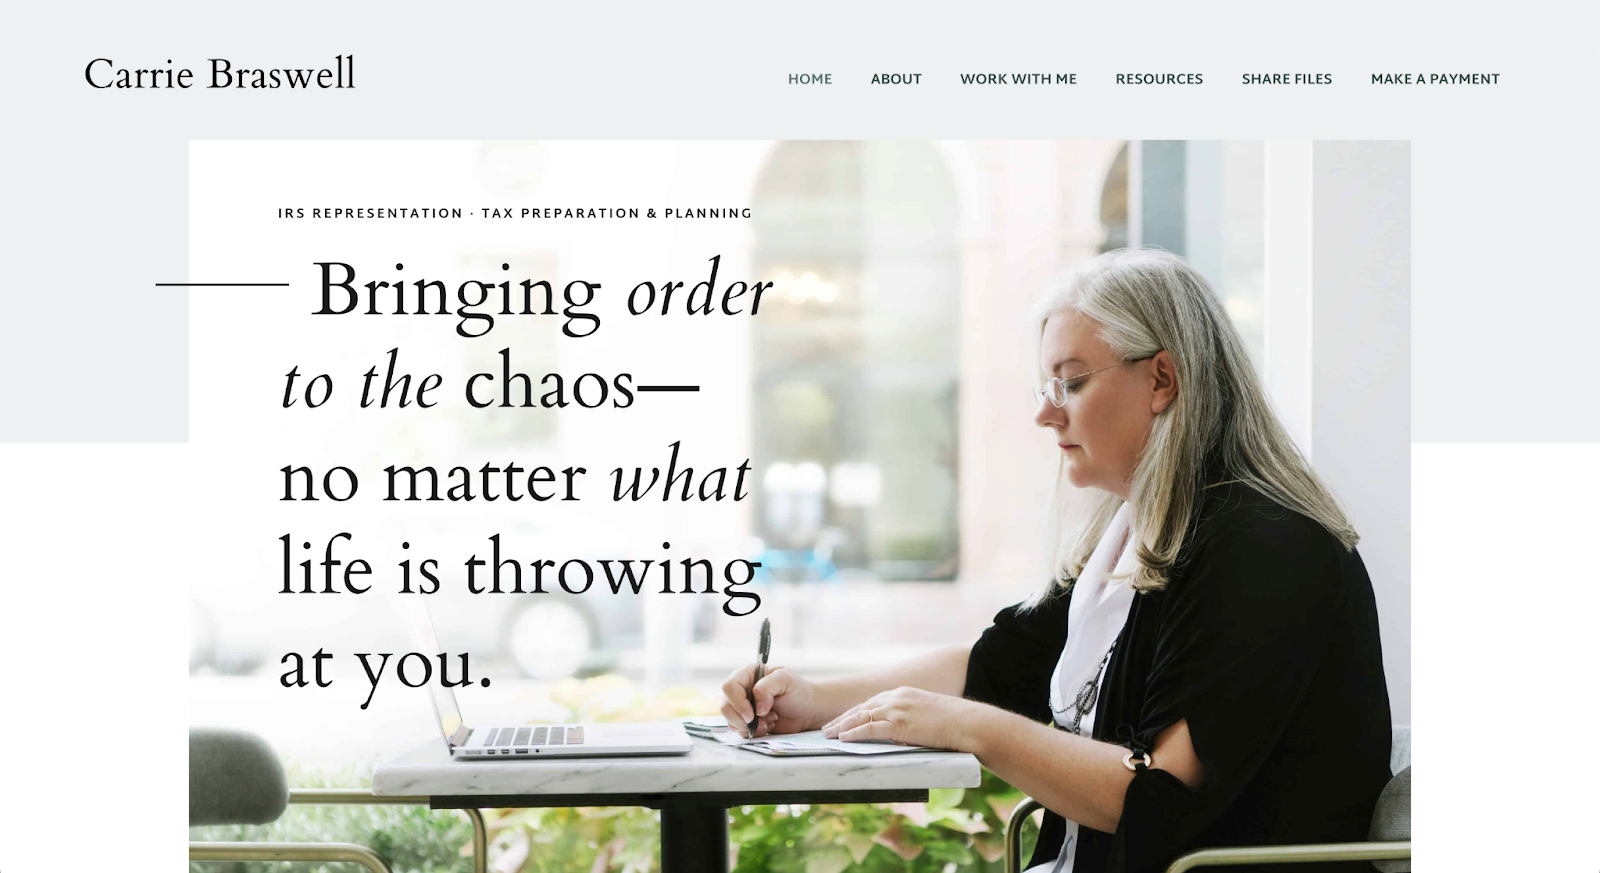 accountant website design, Carrie Braswell